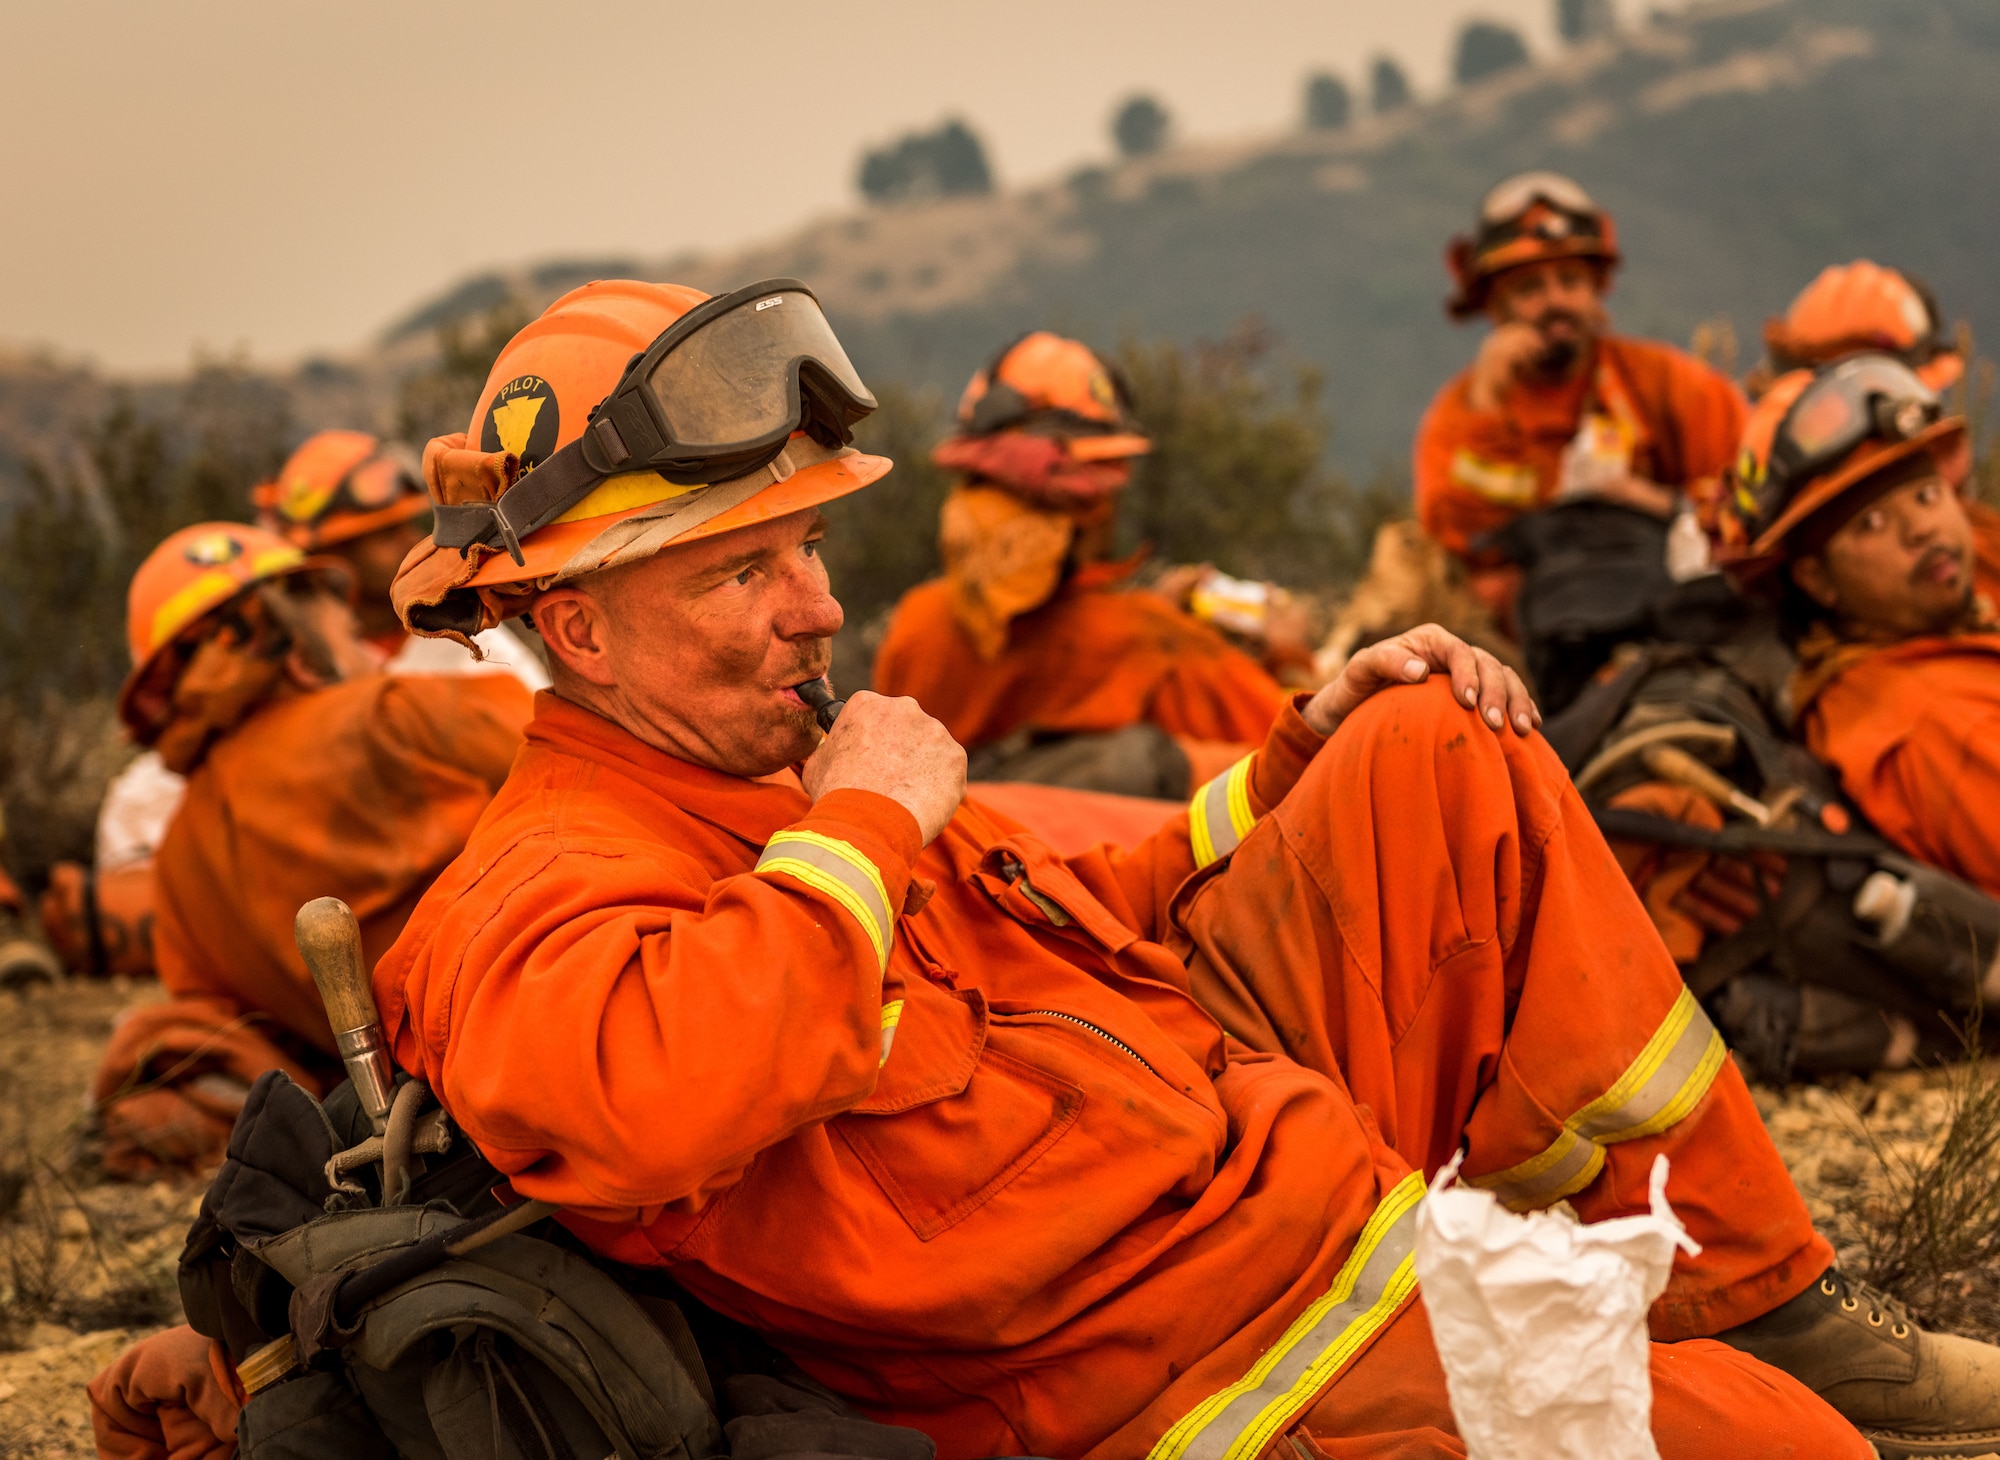 A Cal Fire crew of prison inmates rests after clearing a fire break on a ridge above Santa Barbara, California, Dec. 11, 2017. Inmate crews and bulldozers dug up foliage along ridge lines in the Los Padres National Forest and C-130Js of the 146th California Air National Guard dropped fire retardant chemicals to slow the advance of the Thomas Fire. (U.S. Air Force photo by J.M. Eddins Jr.)